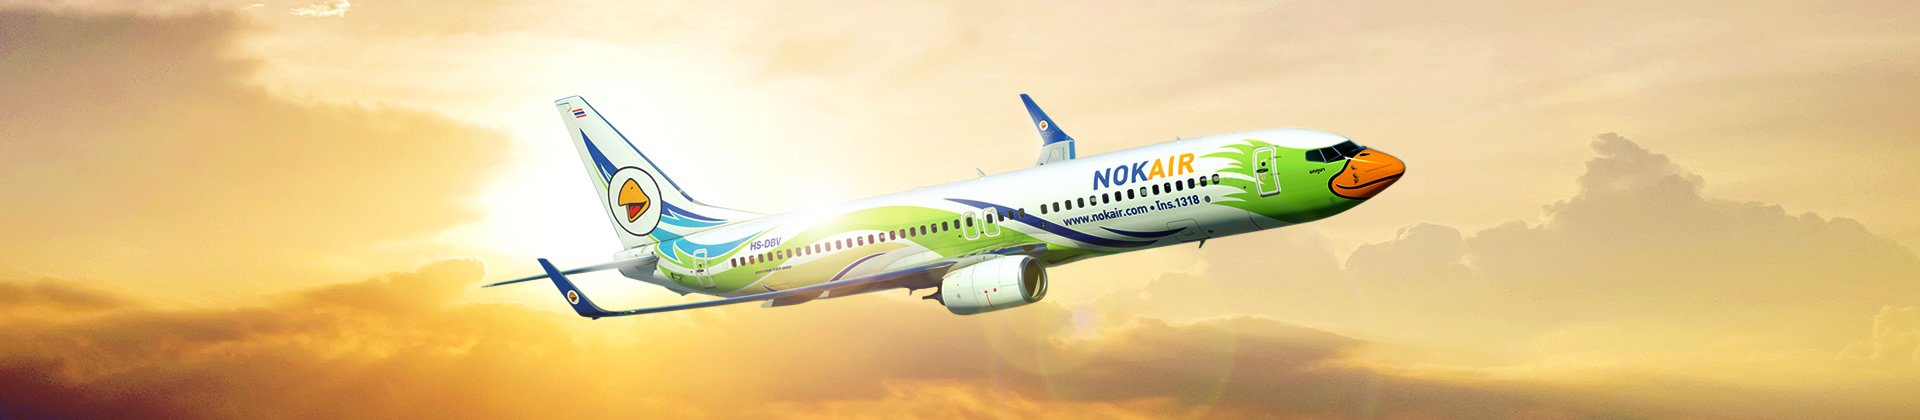 Nok Air is certified as a 3-Star Low-Cost Airline